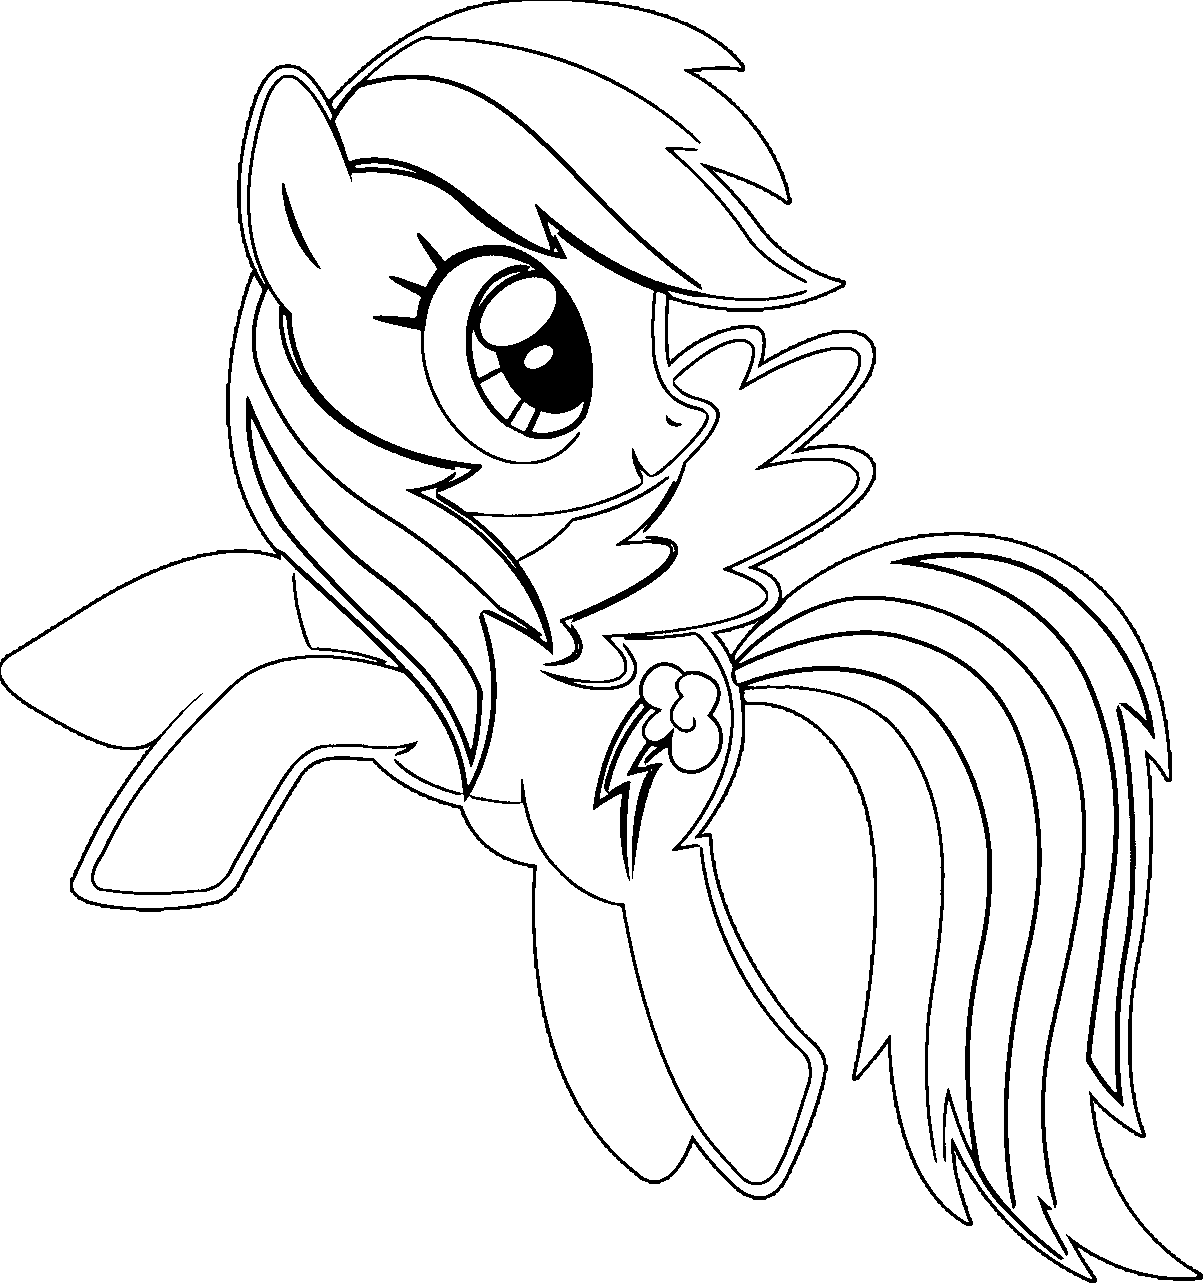 rainbow dash coloring coloring pages for rainbow dash coloring home coloring rainbow dash 